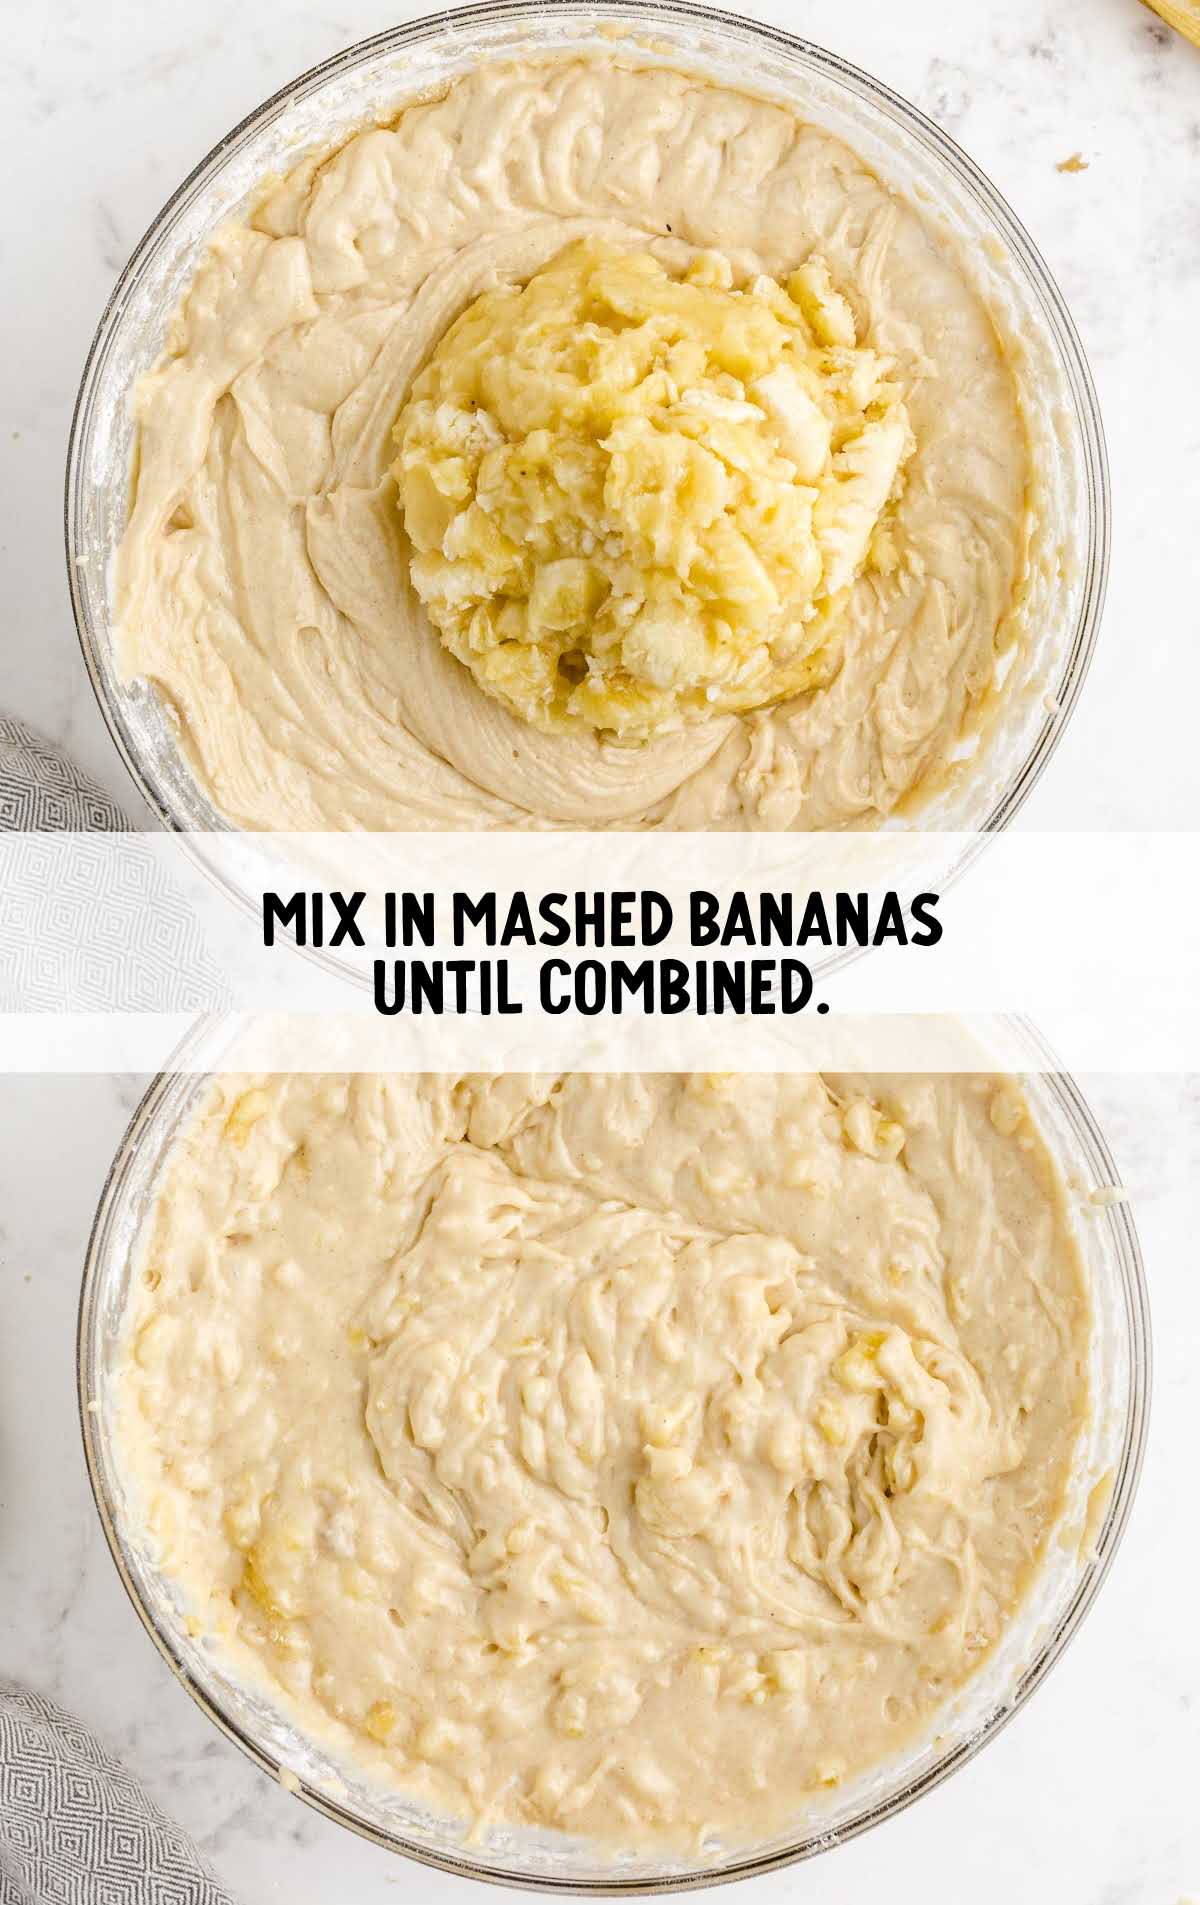 mashed bananas combined into the buttermilk and flour mixture in a bowl